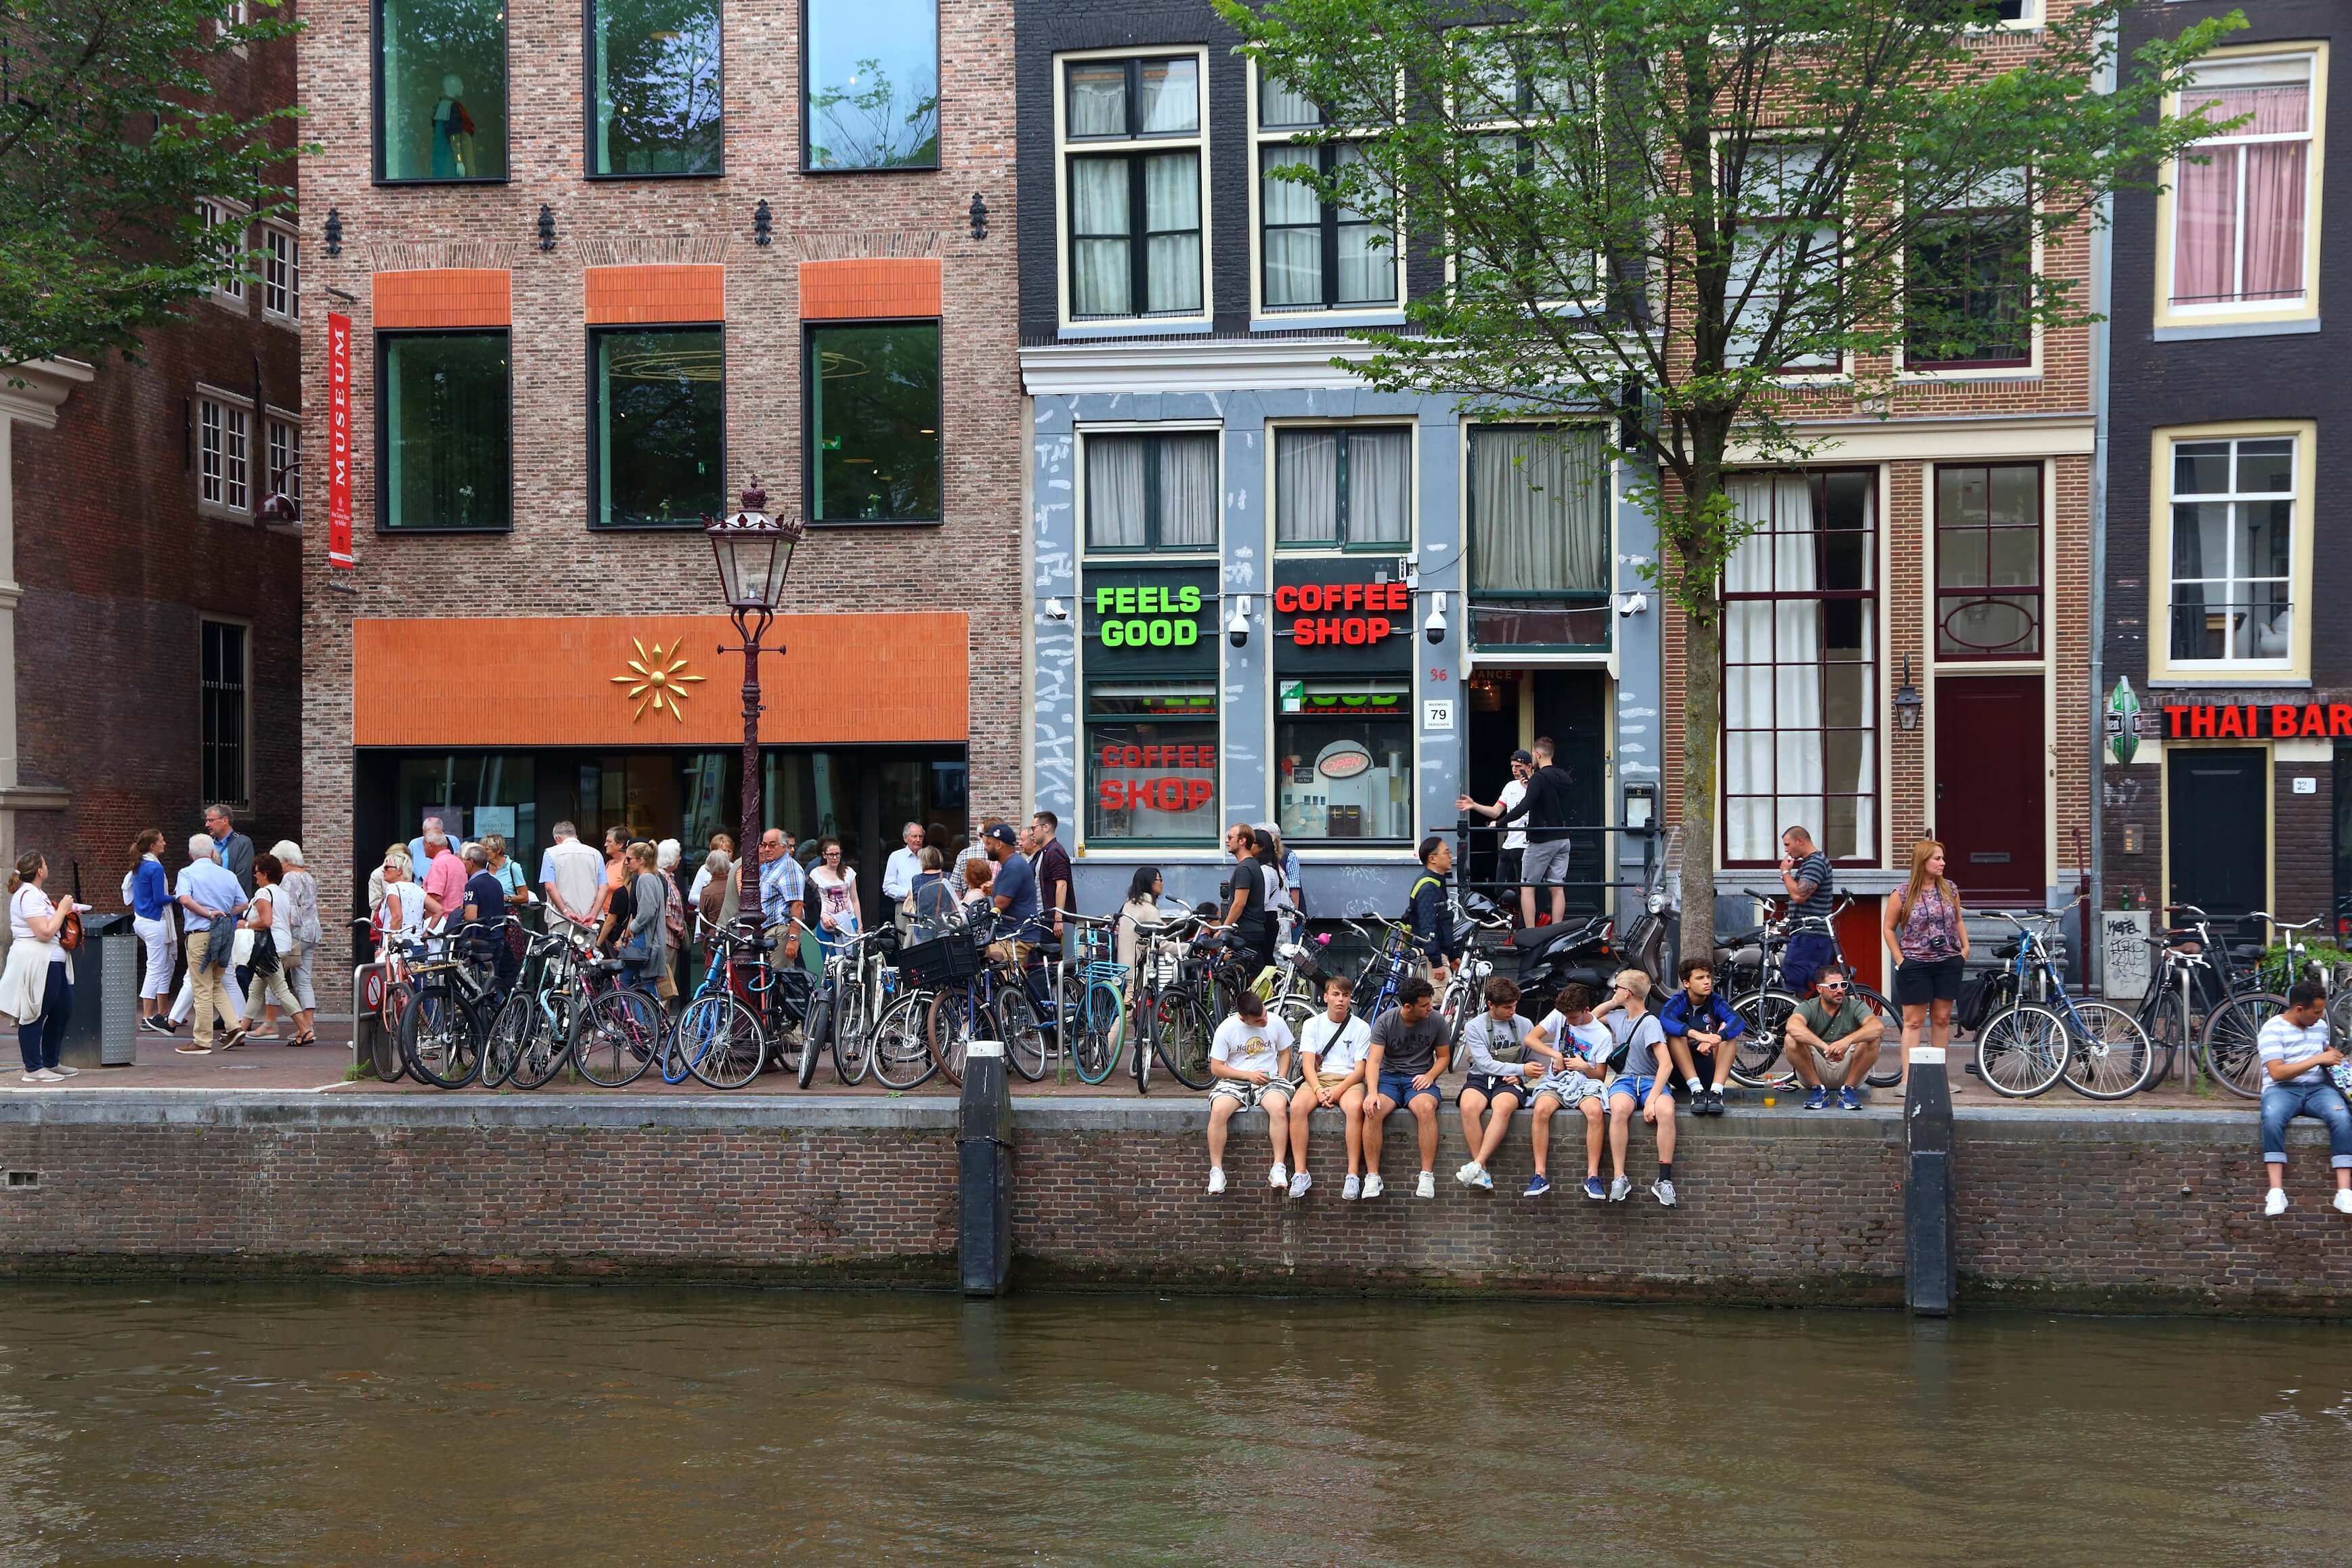 People visit a coffee shop in Amsterdam, Netherlands. Coffeeshops legally sell marijuana for personal consumption.